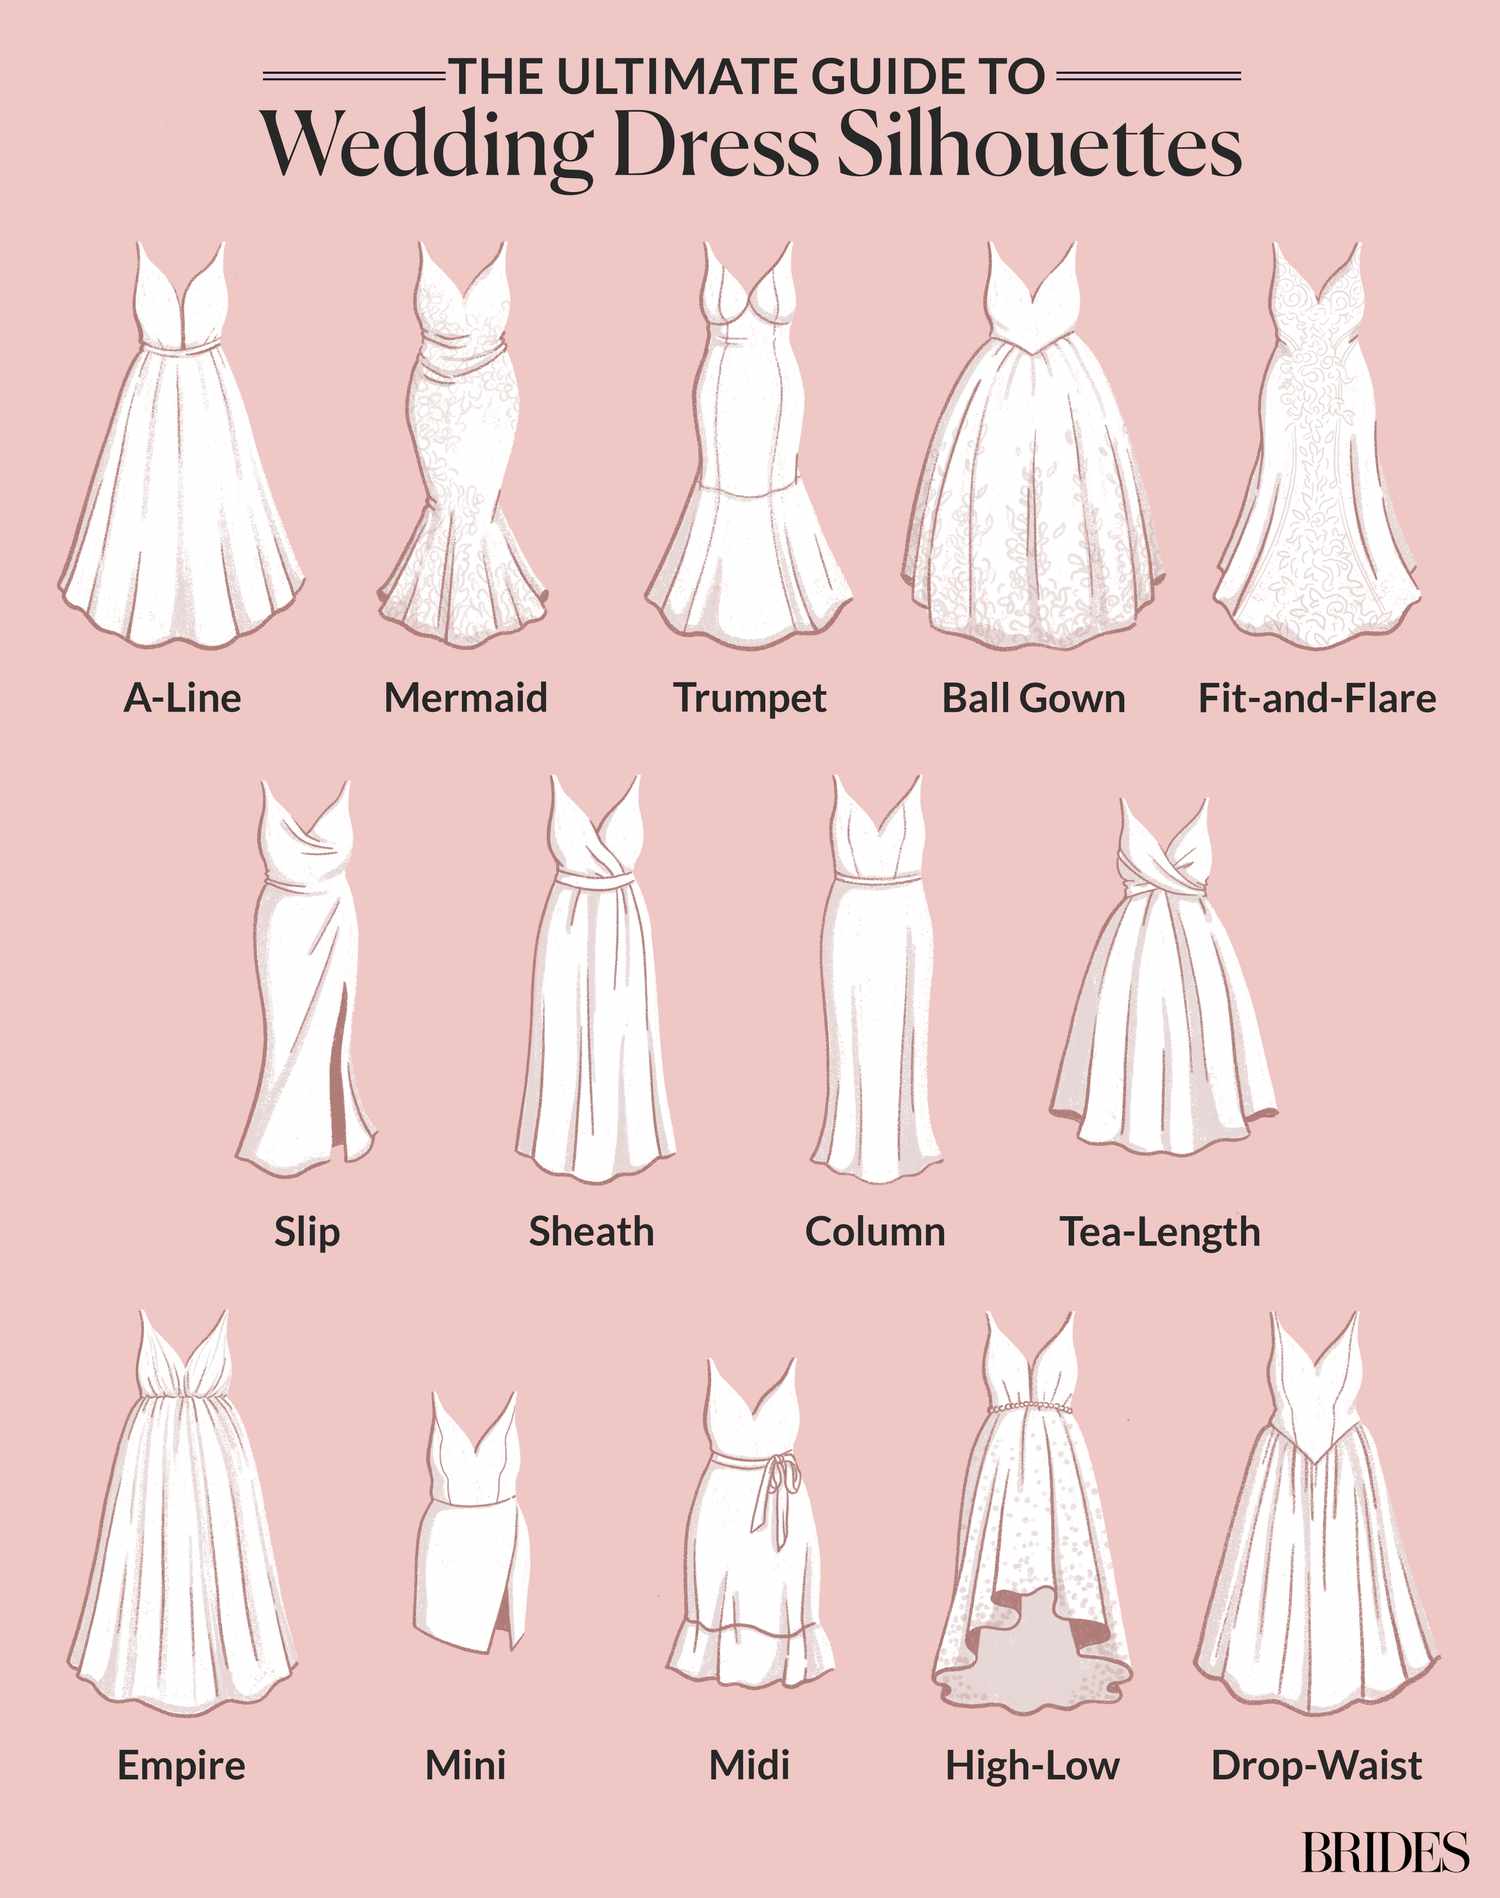 The Ulimate Guide to Wedding Dress Silhouettes Infographic